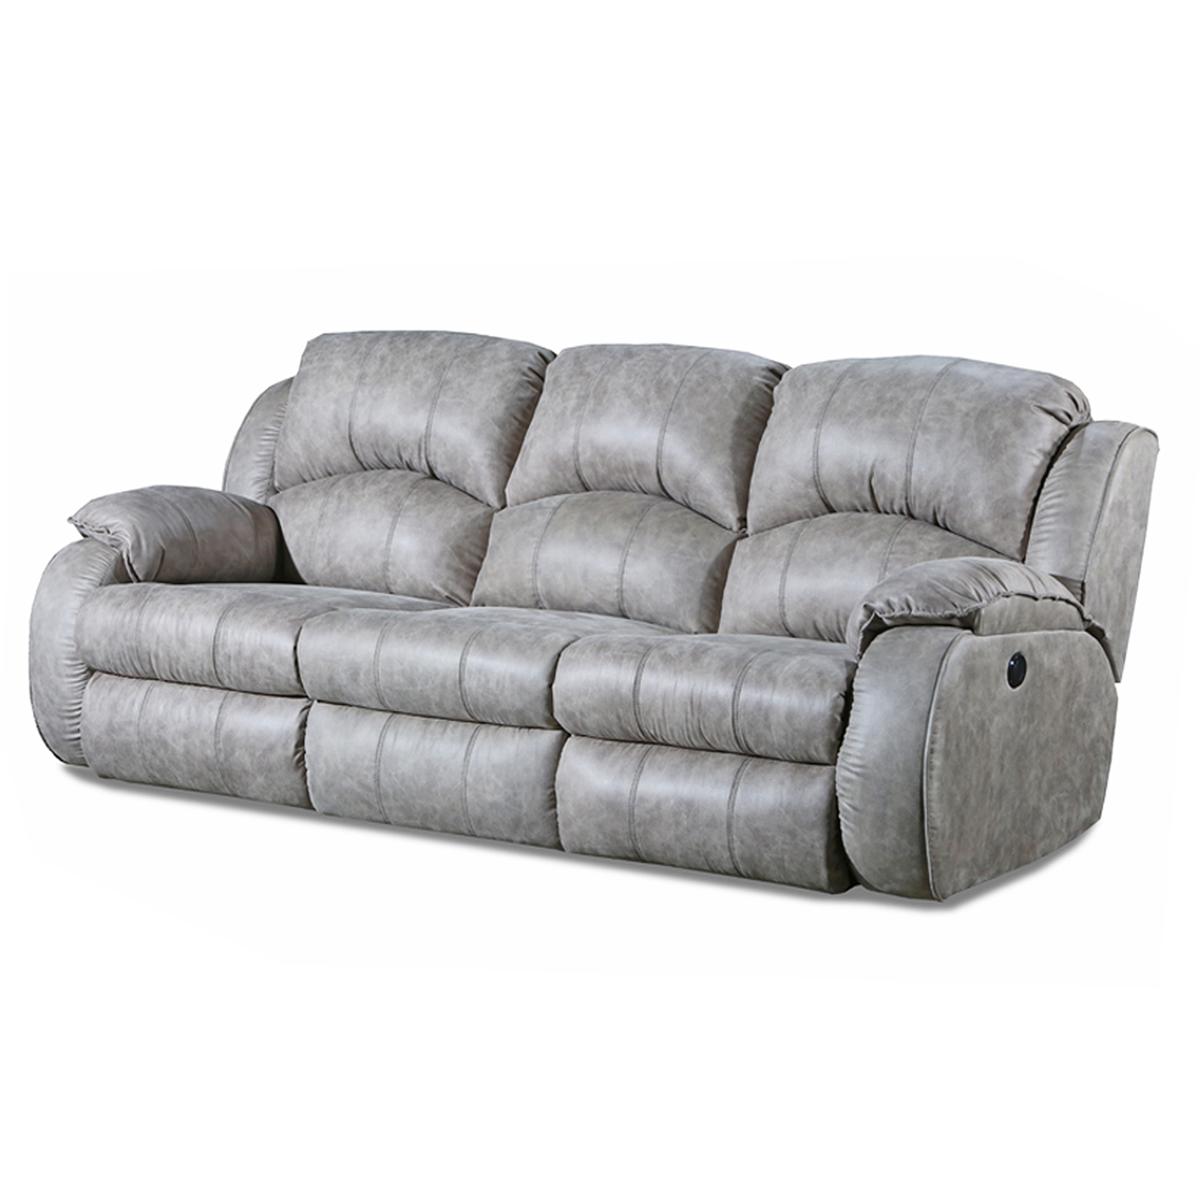 Southern Motion Cagney Dual Power Reclining Sofa